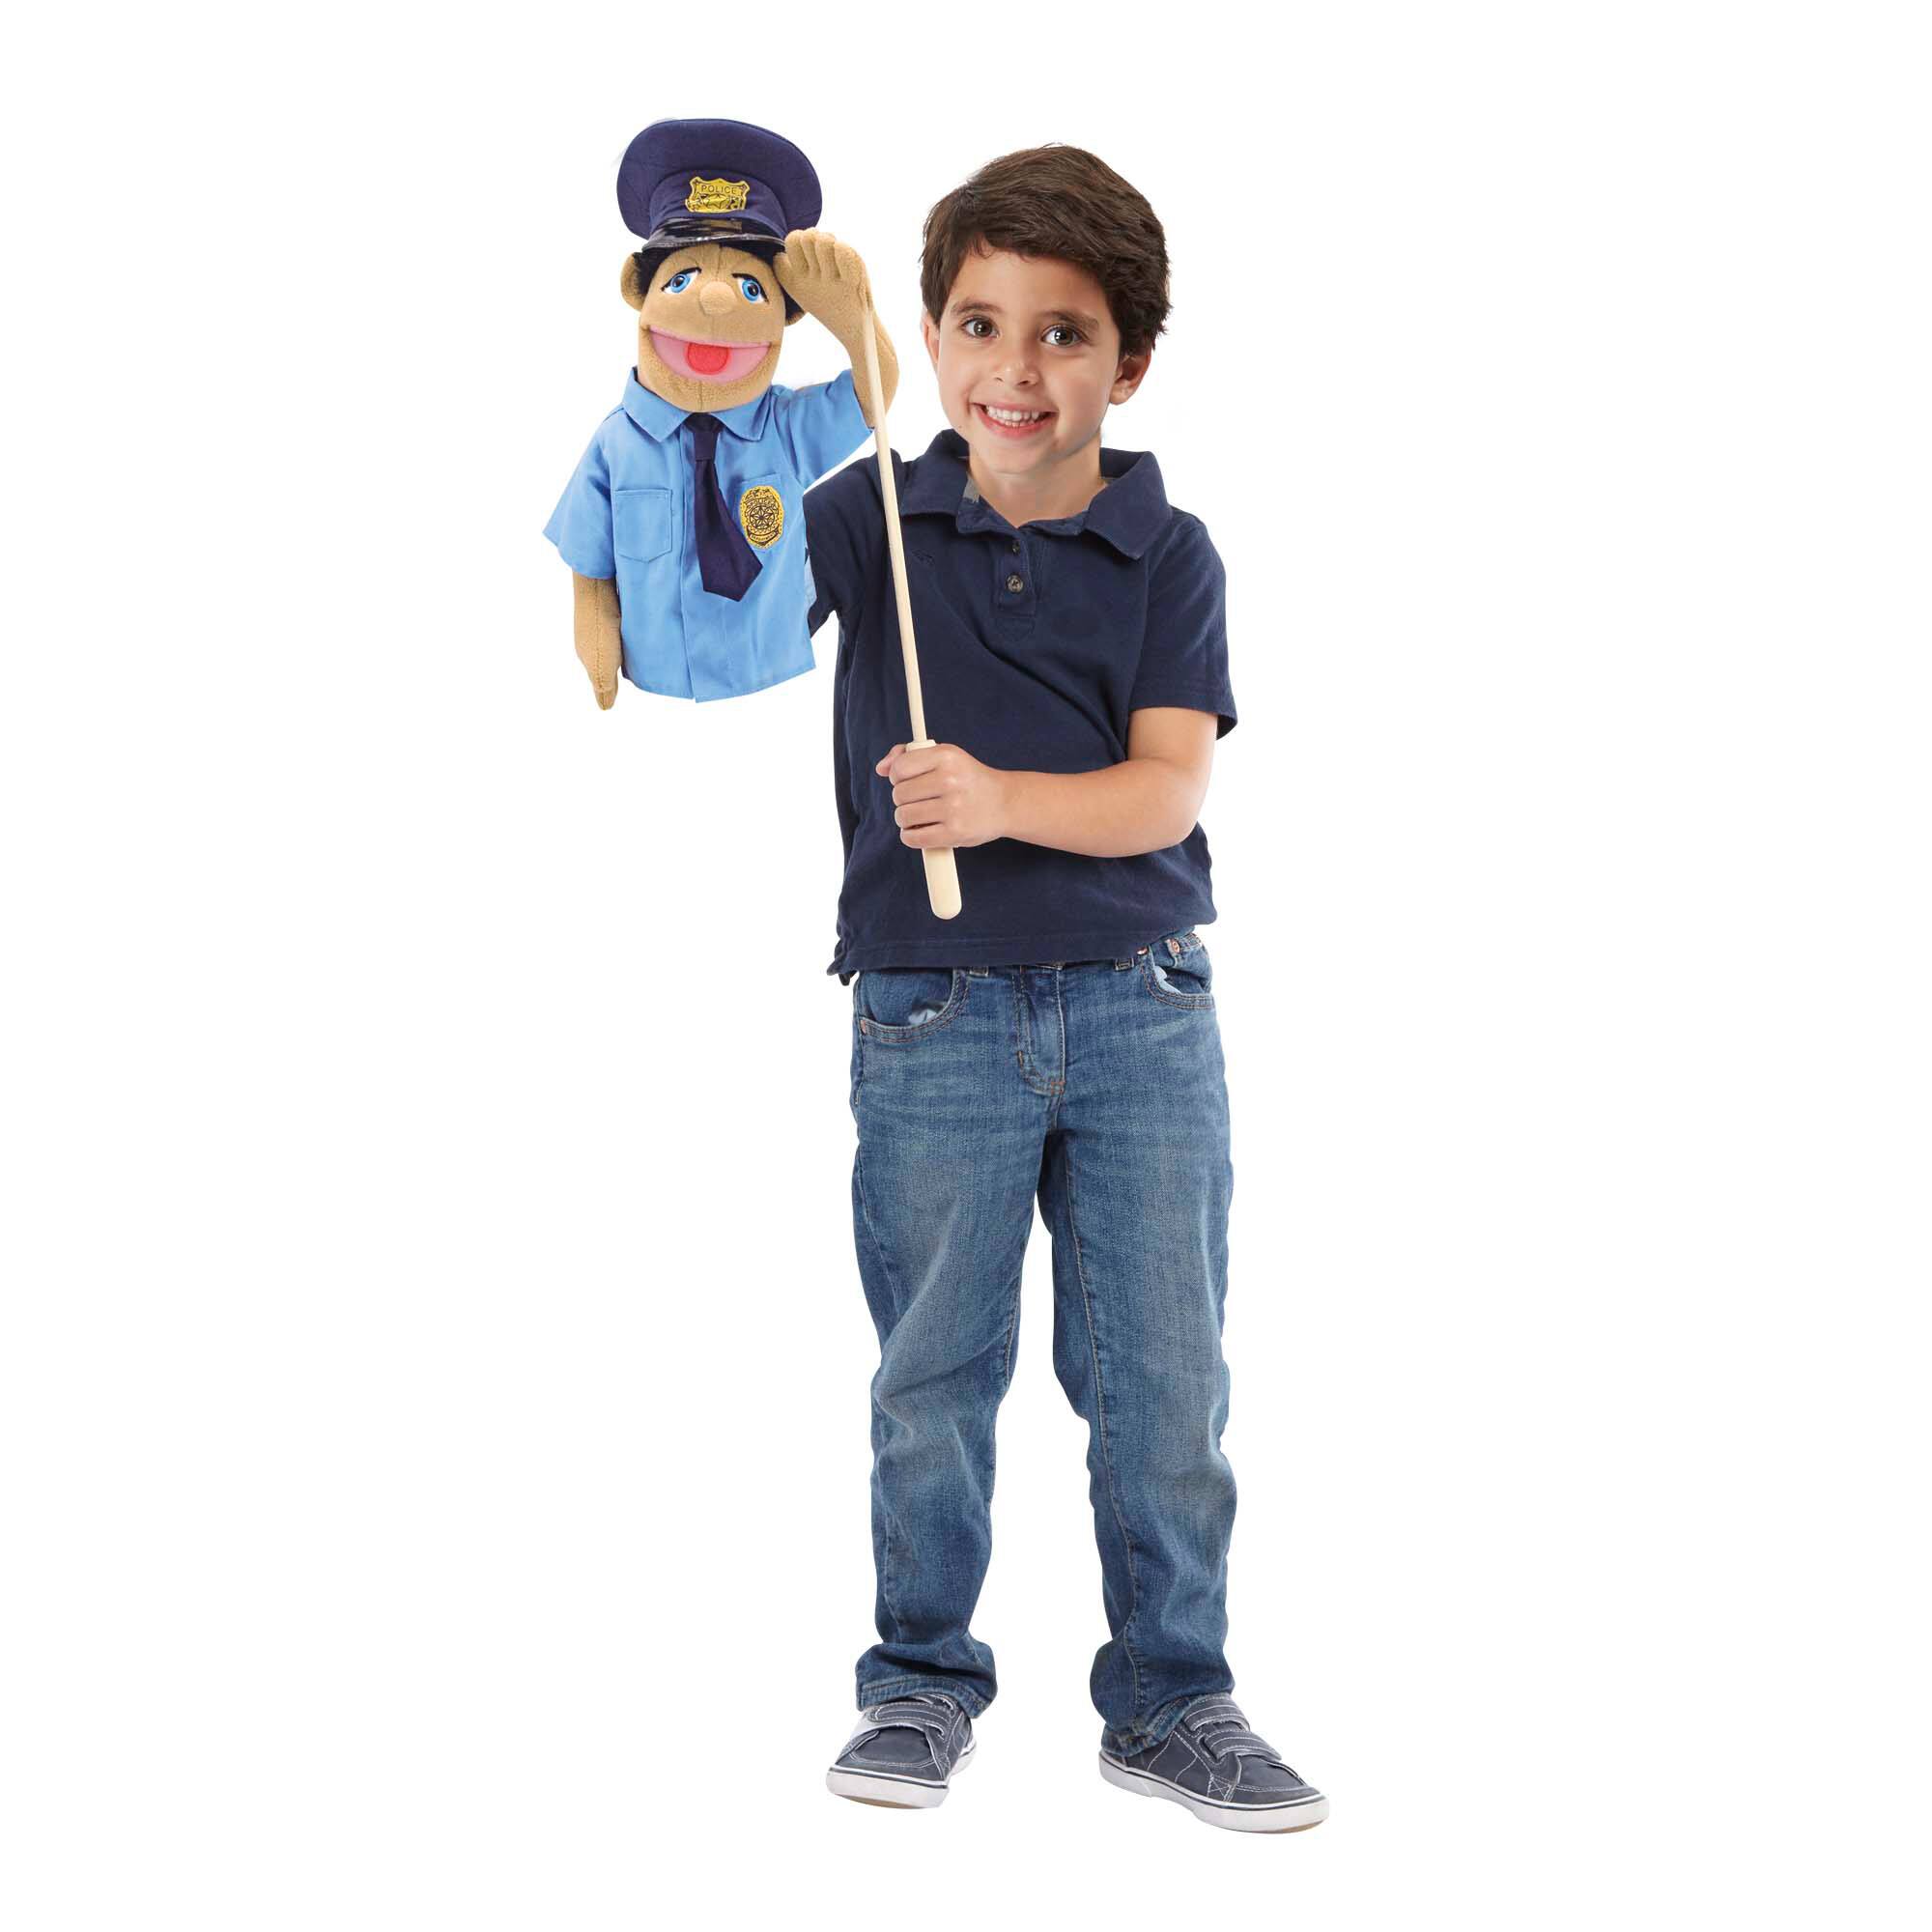 Police Officer Puppet Melissa & Doug 40351 Details about   Puppets & Plush Toy 